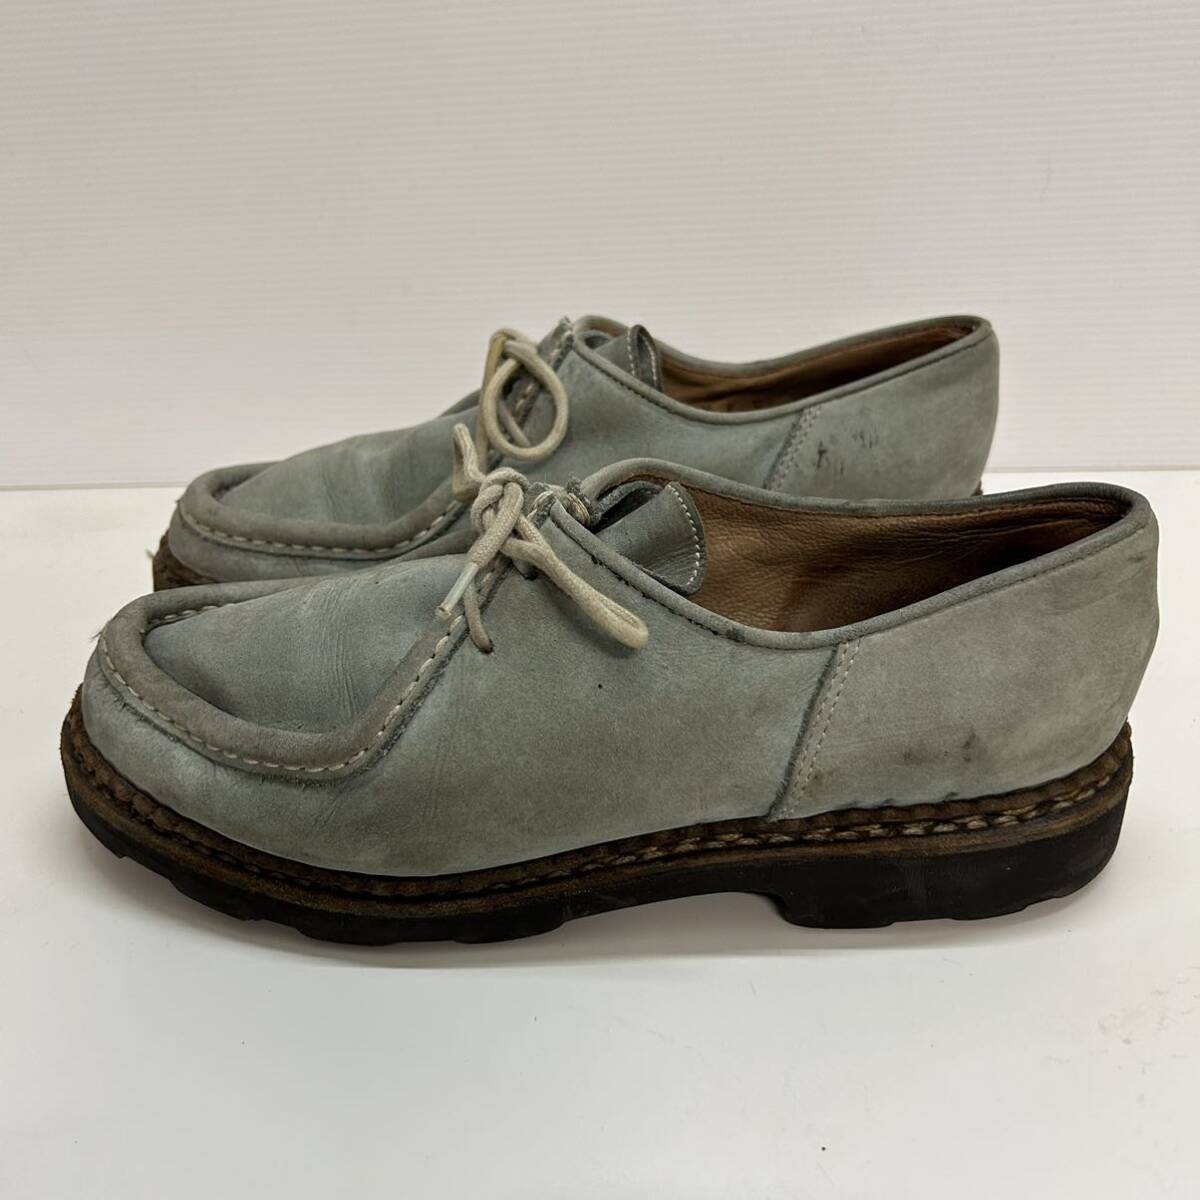 C127 Paraboot Paraboot men's wala Be moccasin Loafer US5.5 approximately 23.5cm light blue suede France made 